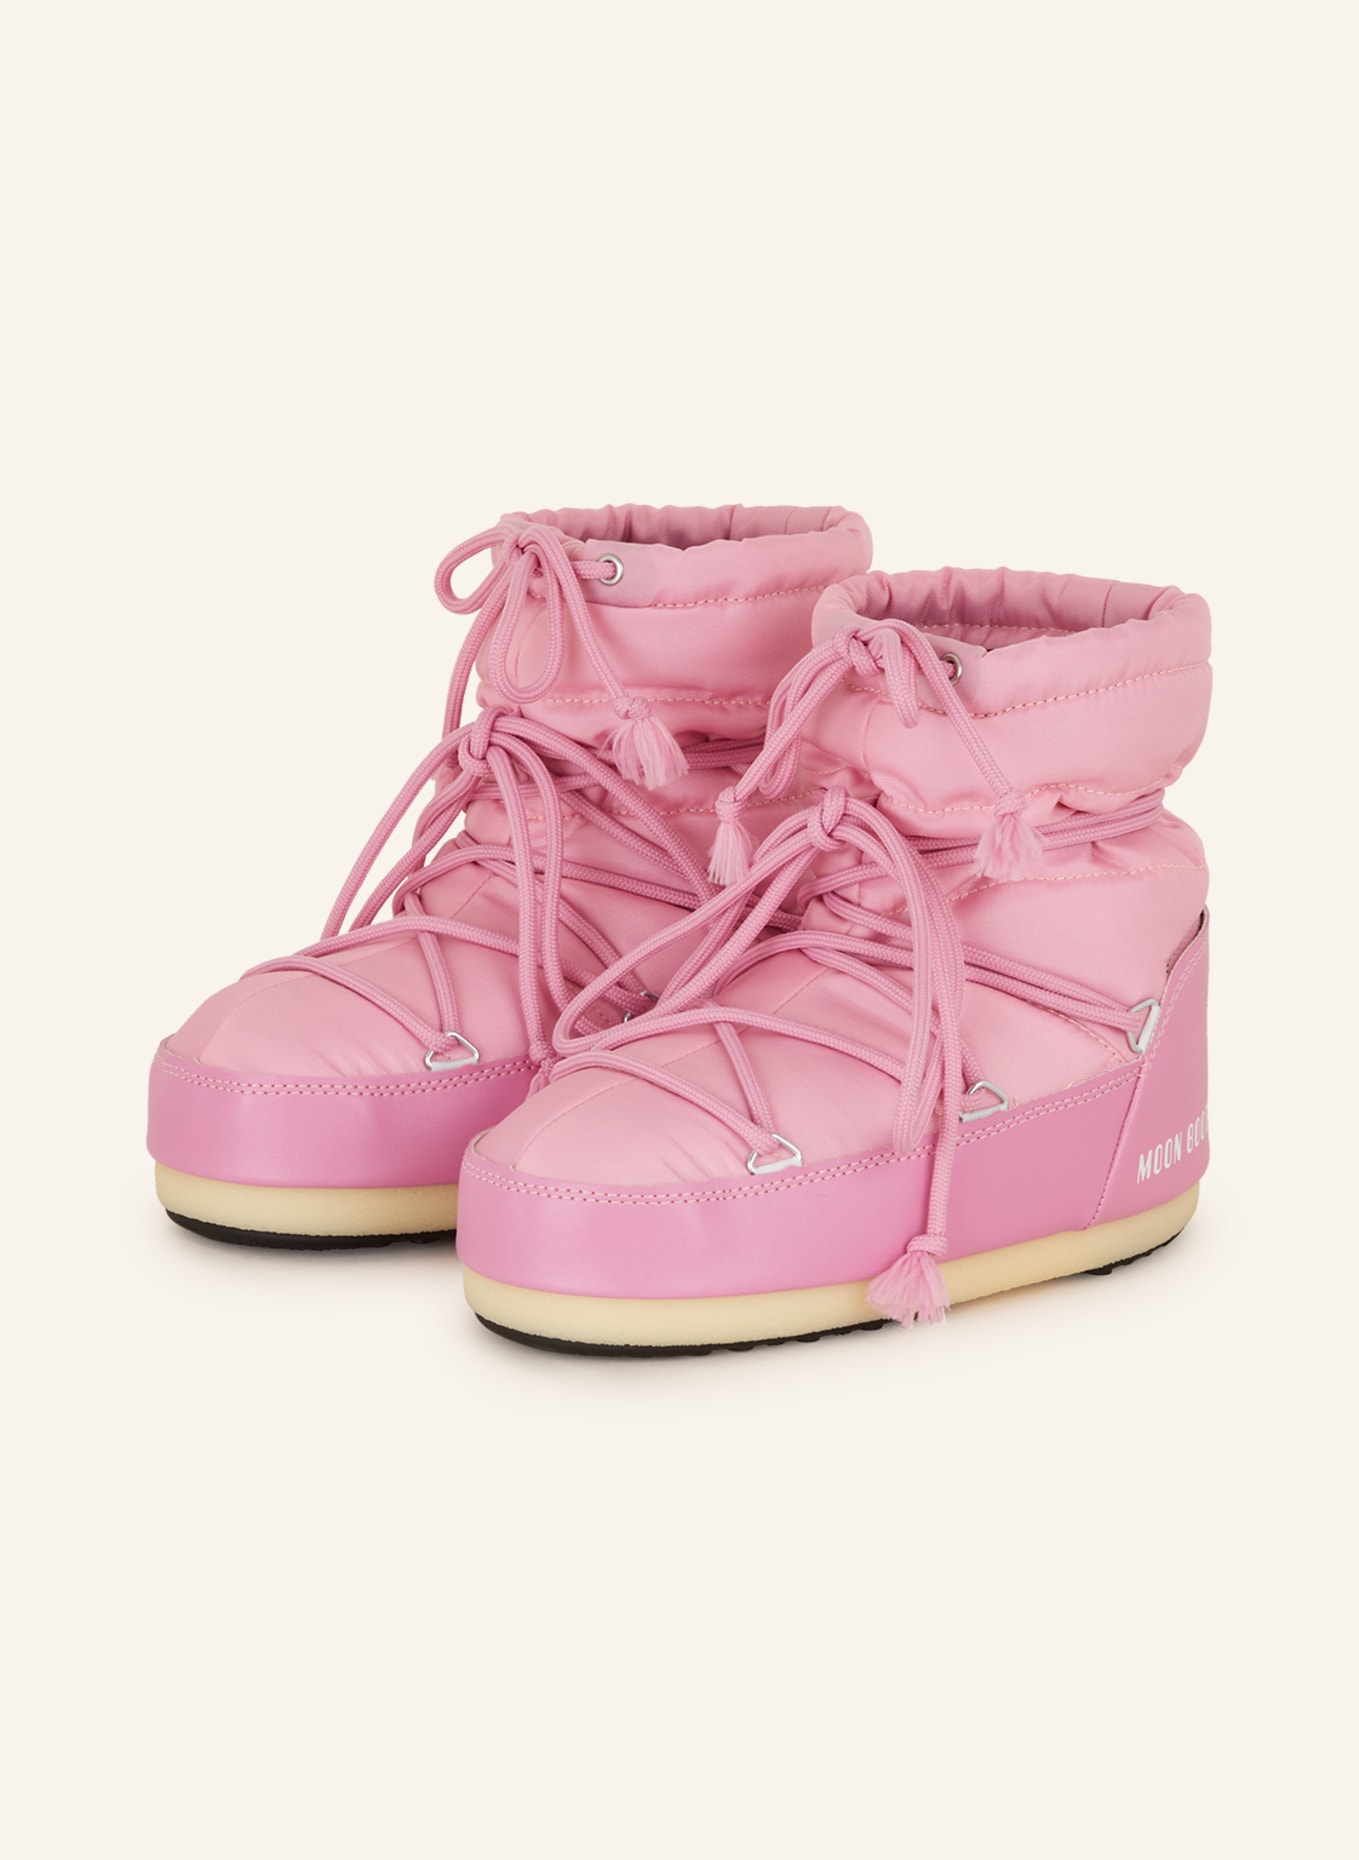 MOON BOOT Moon Boots ICON LOW, Farbe: PINK (Bild 1)